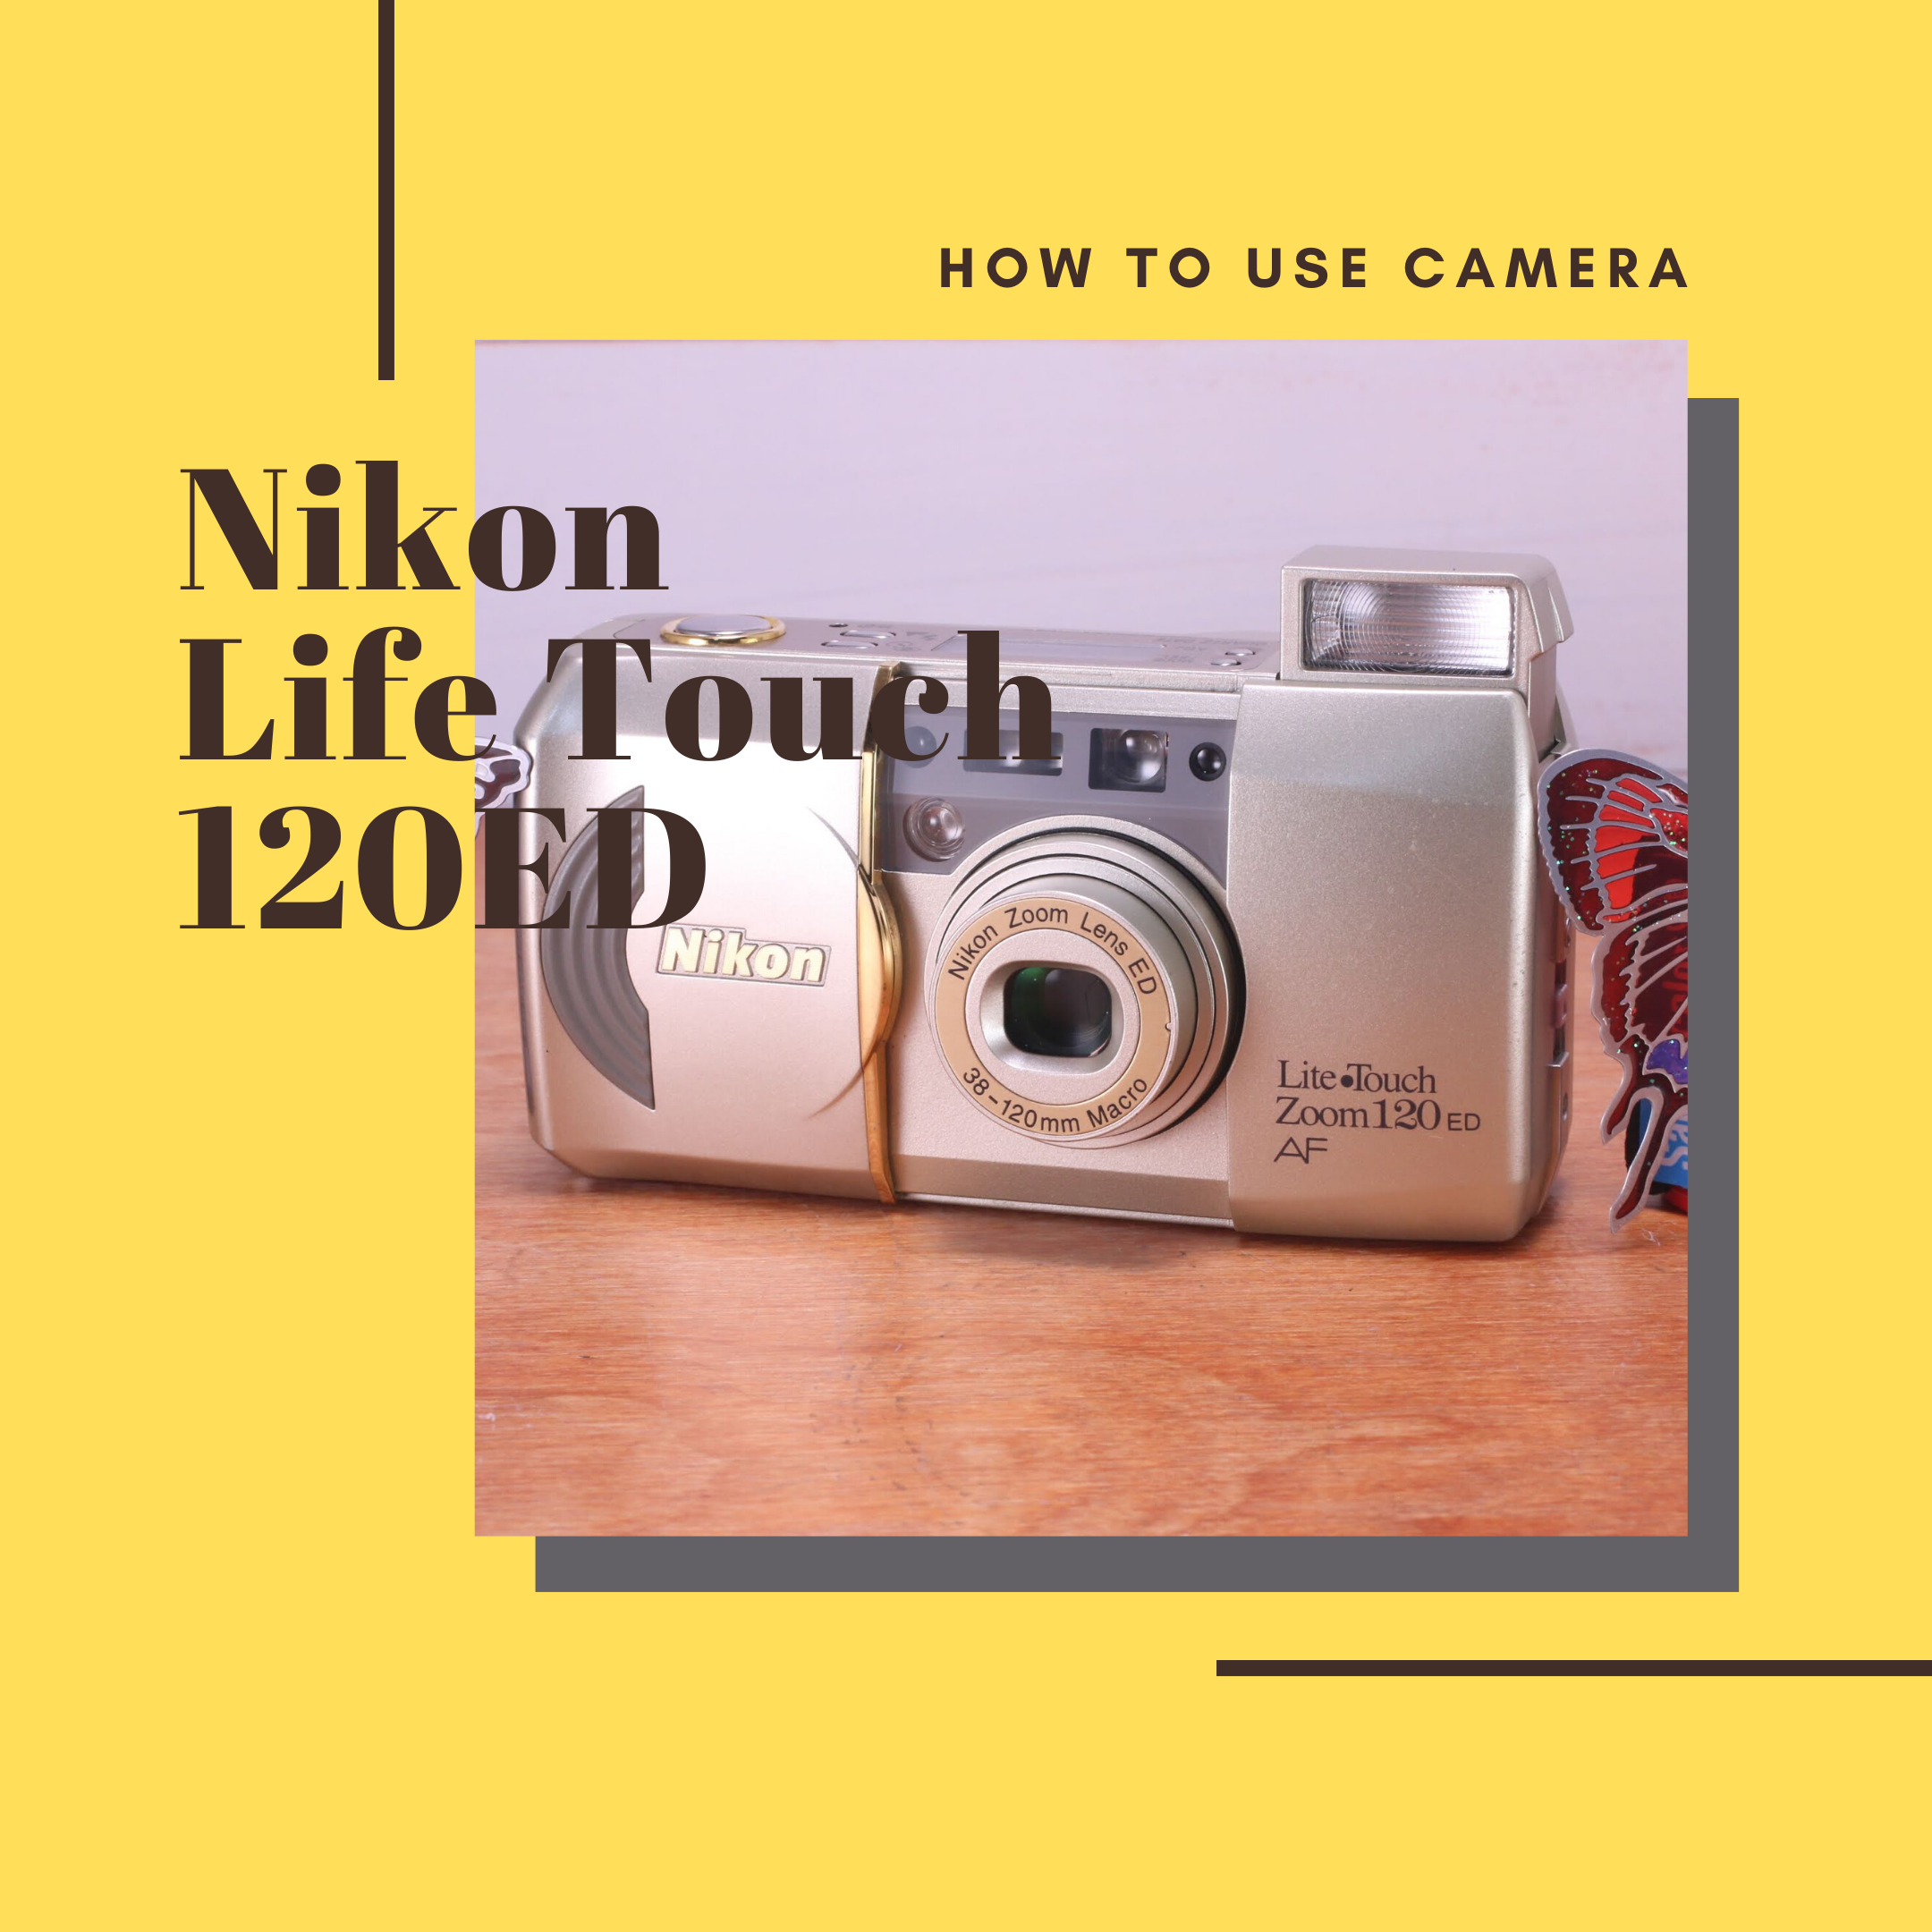 Nikon Life Touch Zoom 120ED の使い方 | Totte Me Camera